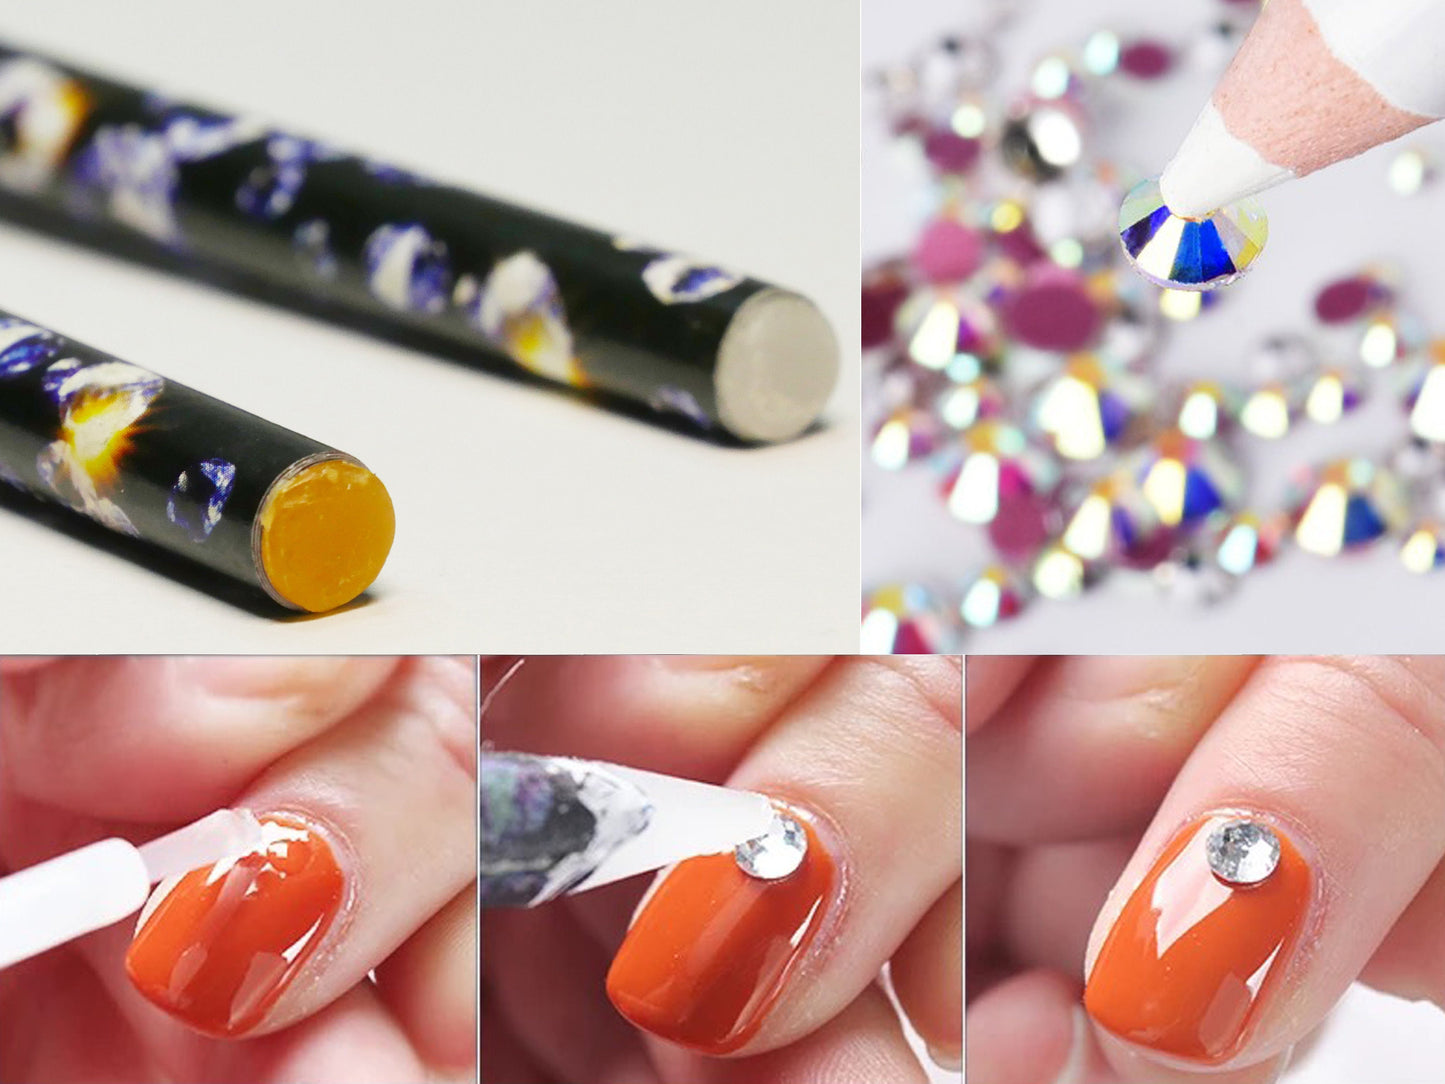 Picking Up Rhinestone Picker Pen Wooden Wax Pen Nail Manicure Tool Random  Color KD13655845 From Rnoq, $0.4